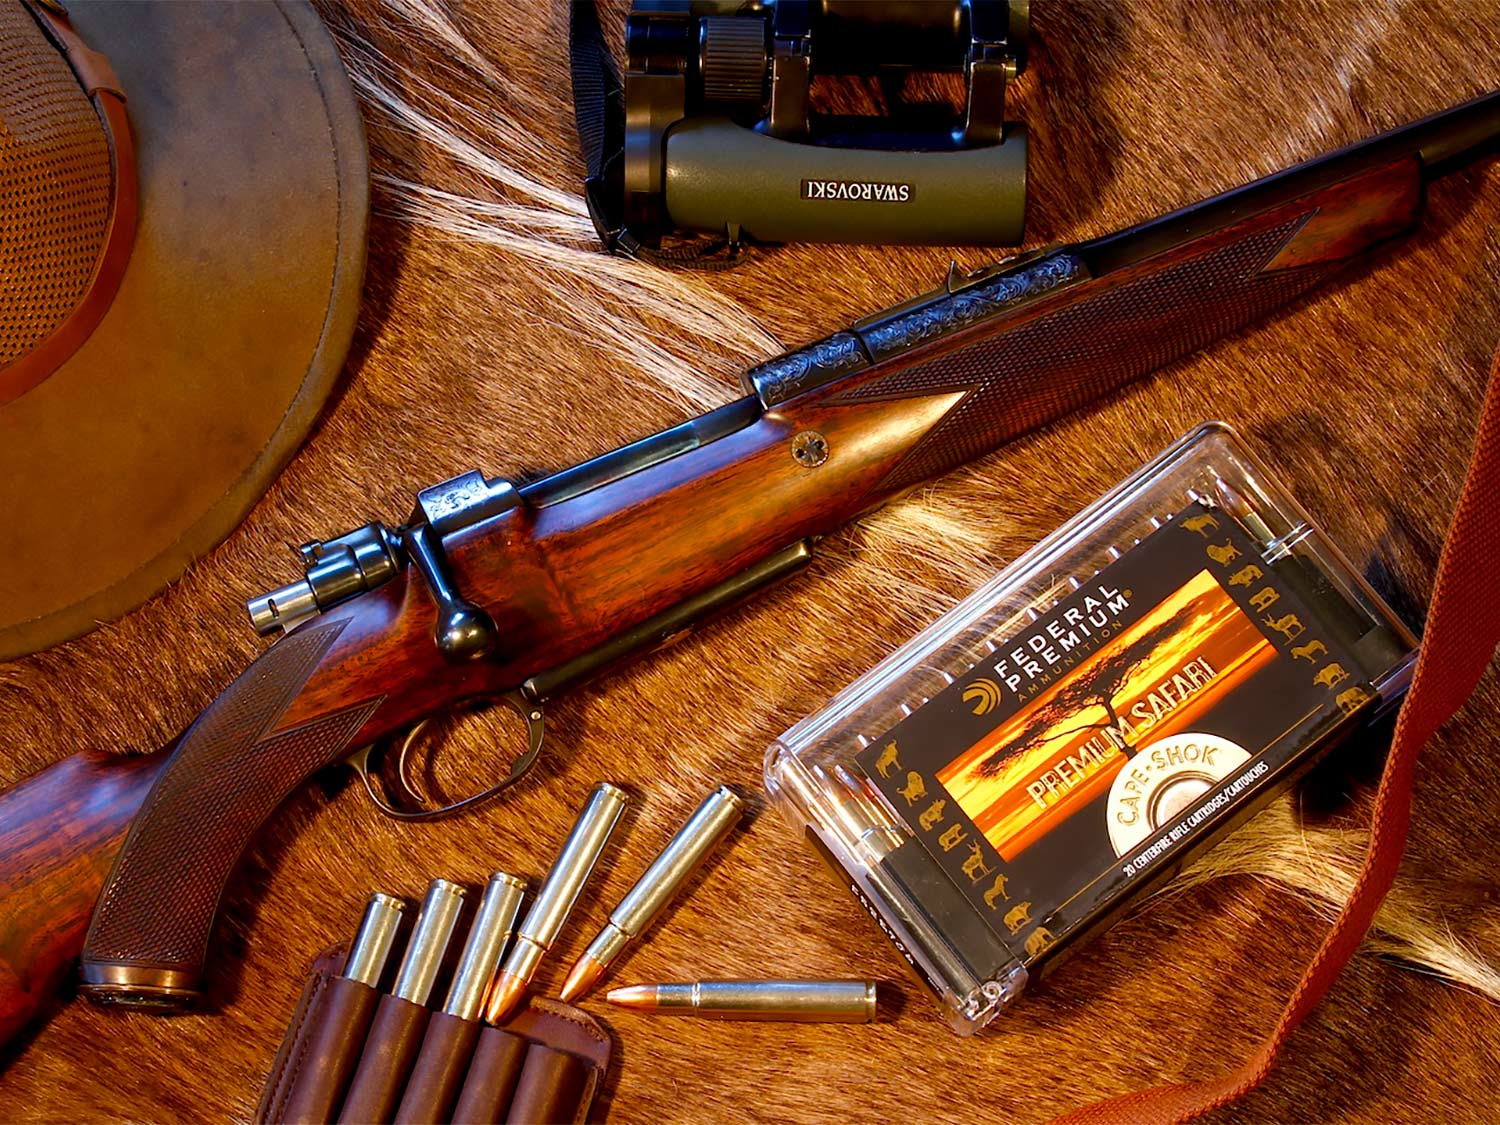 A rifle and hunting ammo and gear.